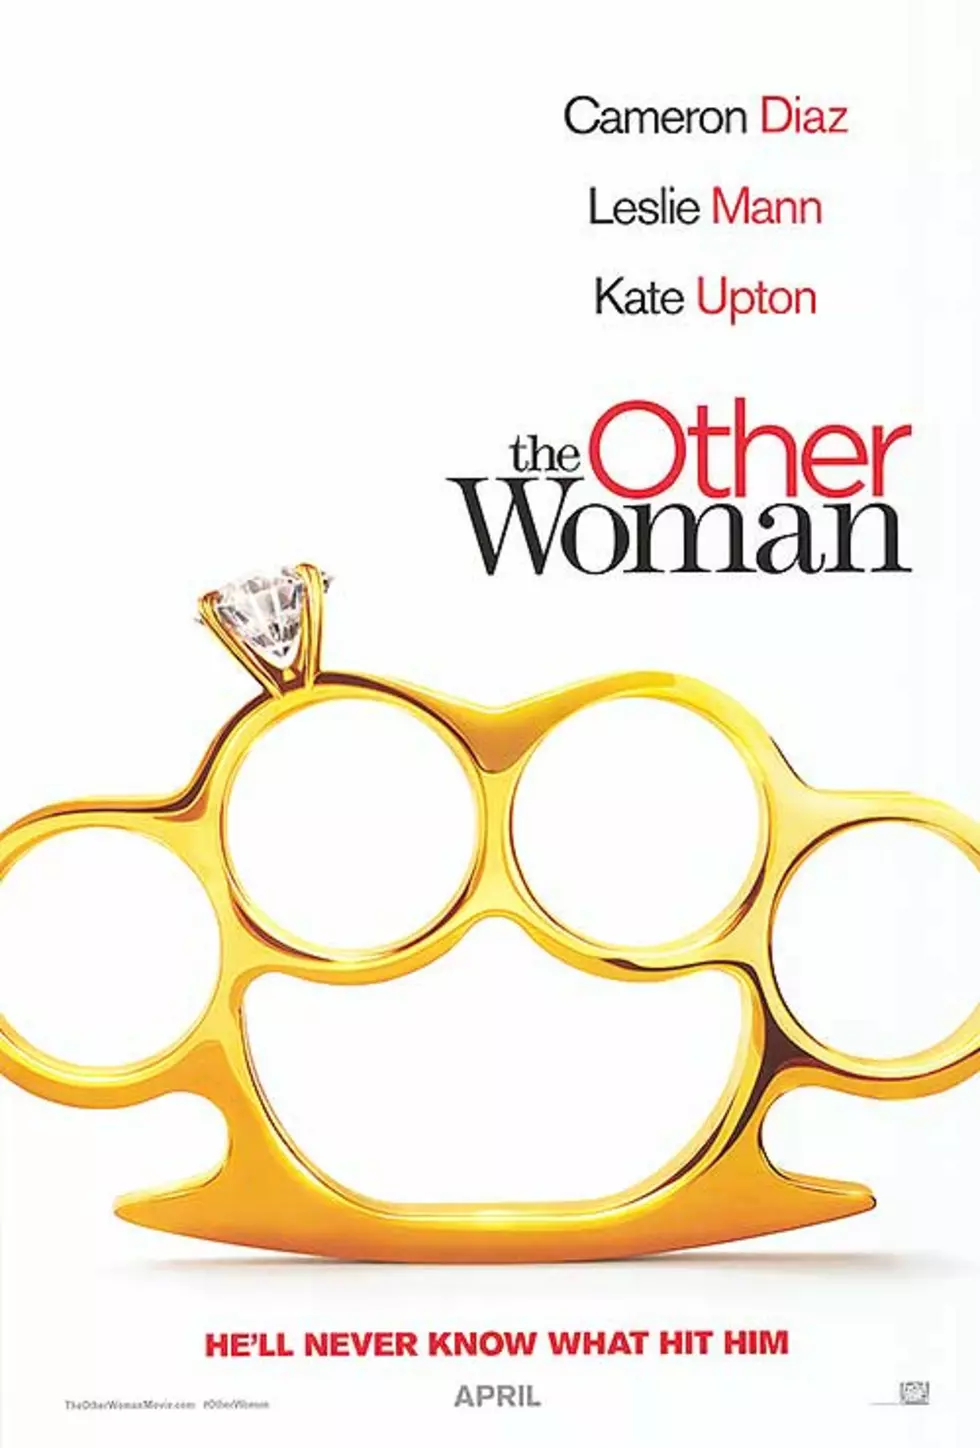 Kelly Bennis Pulls No Punches With ‘The Other Woman’ [Audio, Video]